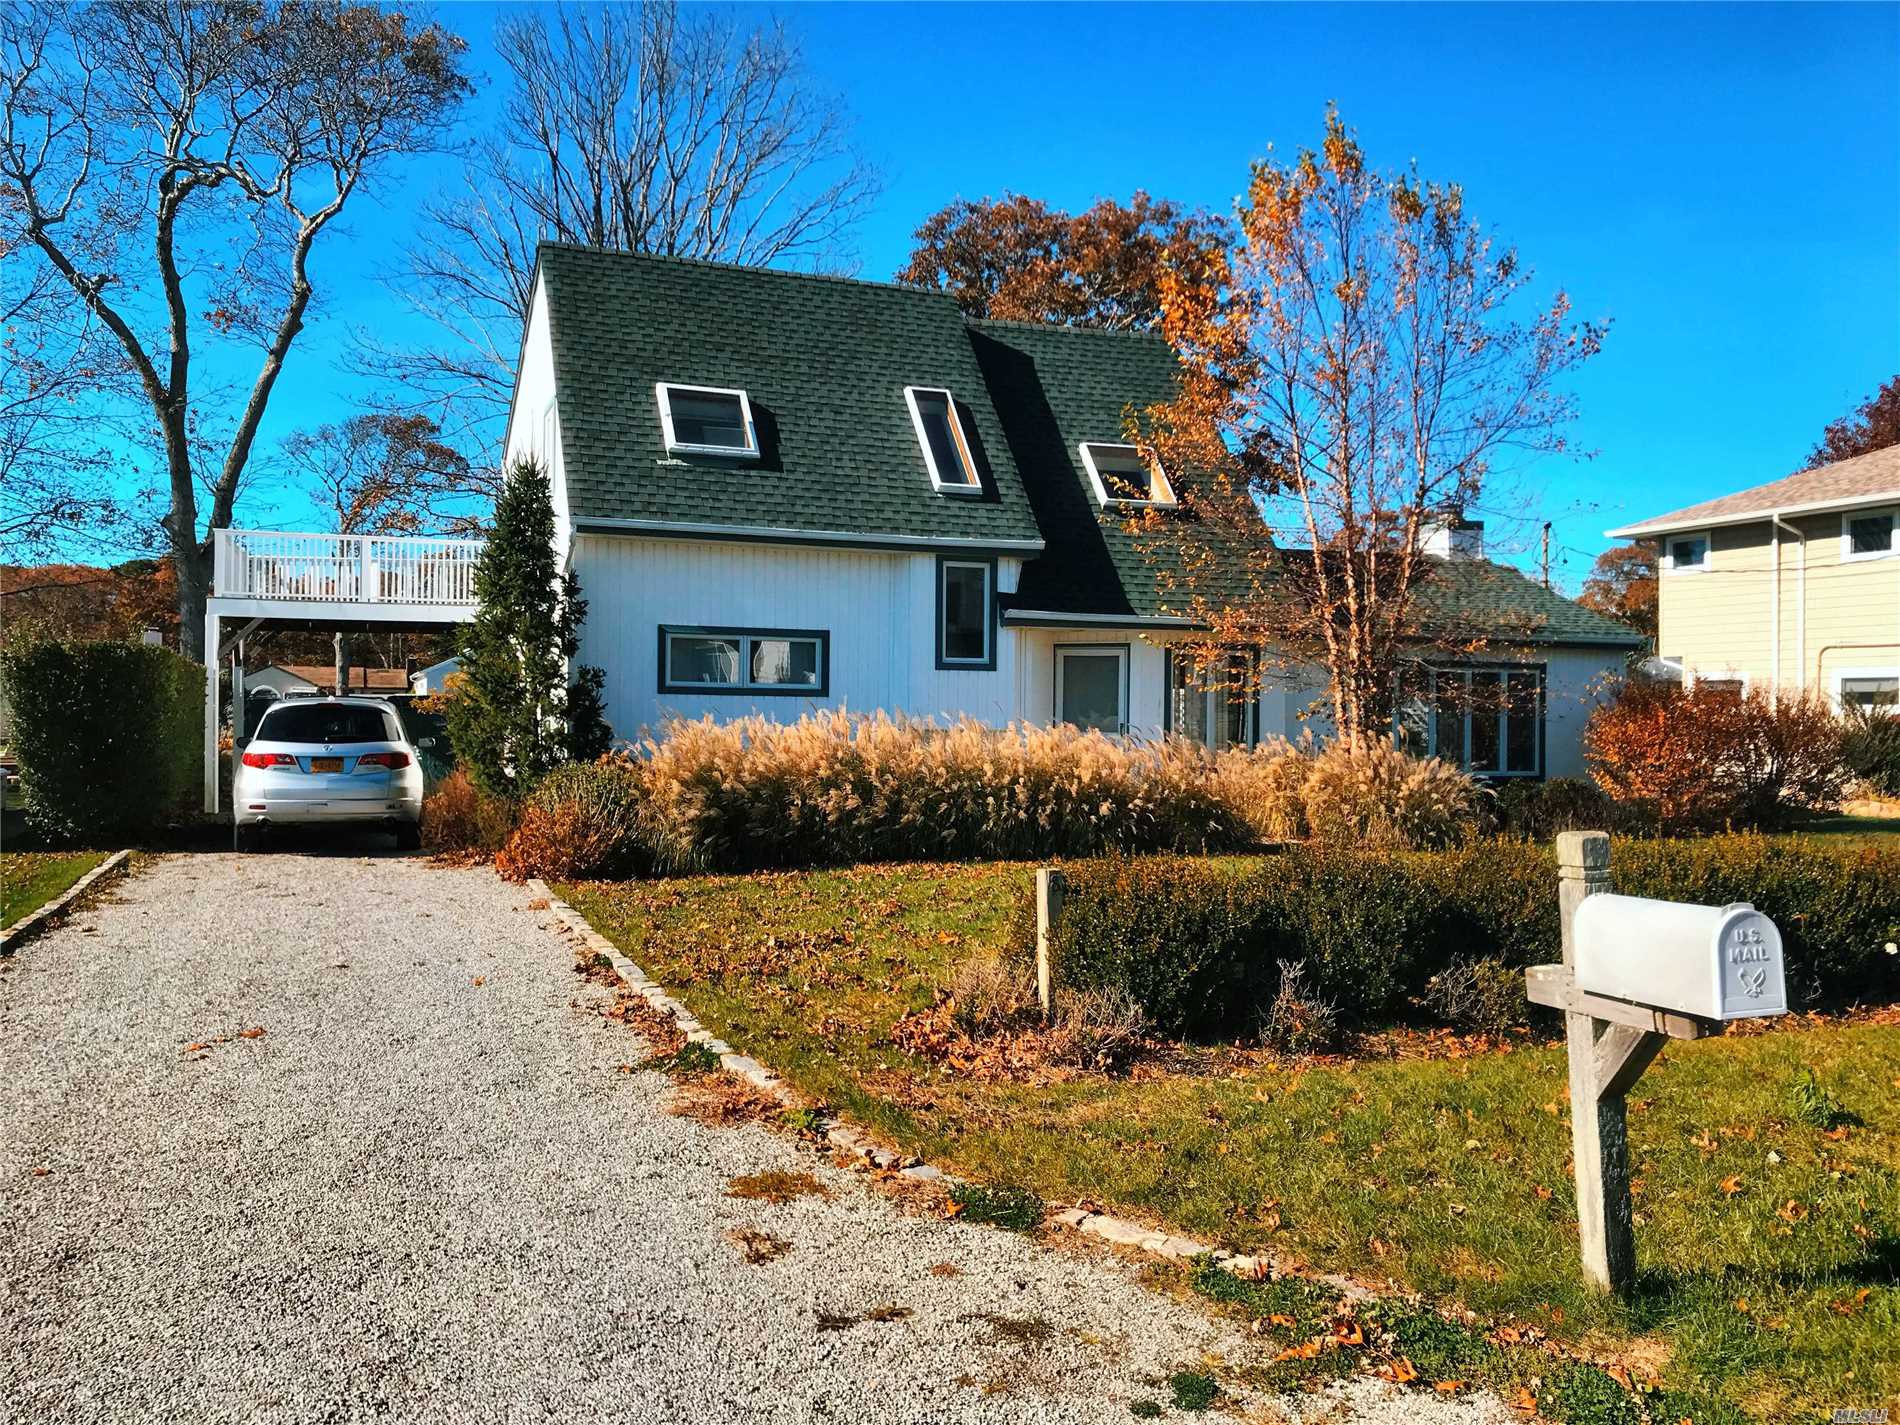 Listing in E. Quogue, NY